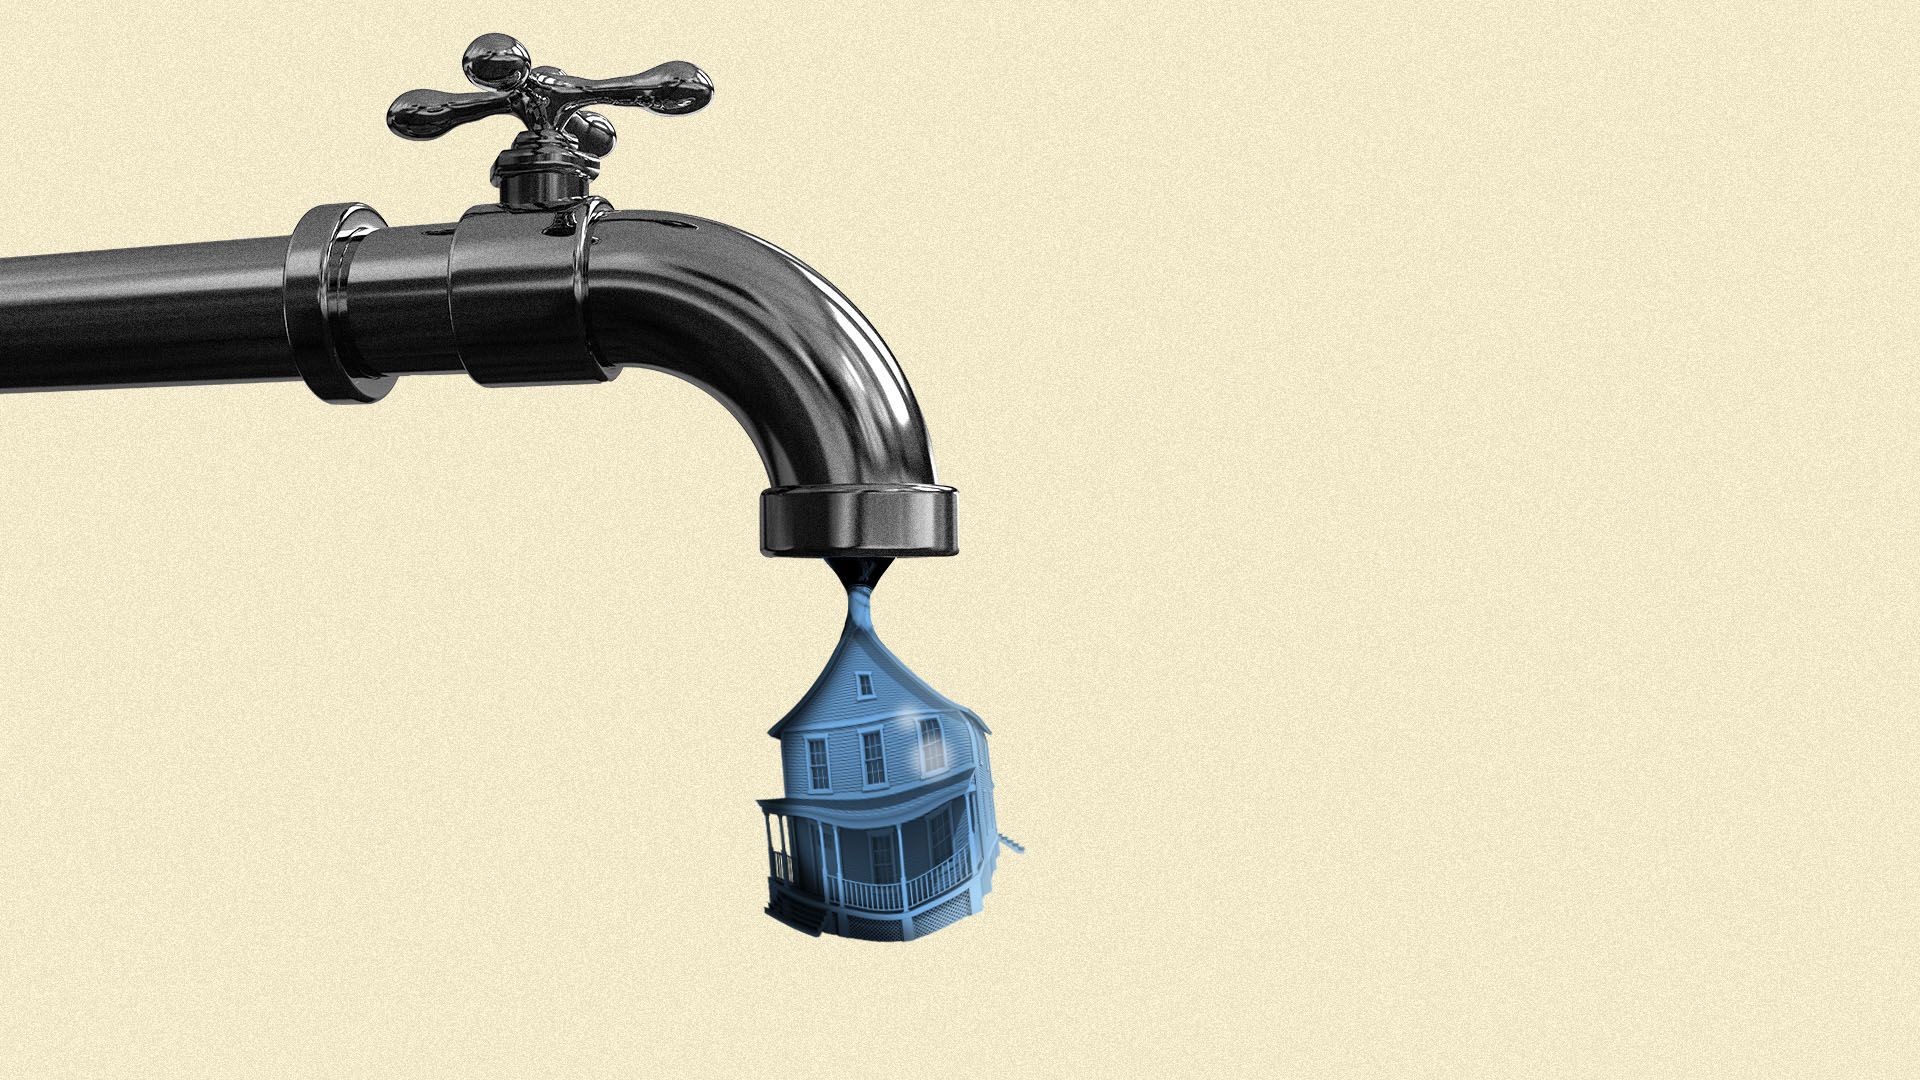 In this illustration, a house drops from a water faucet. 